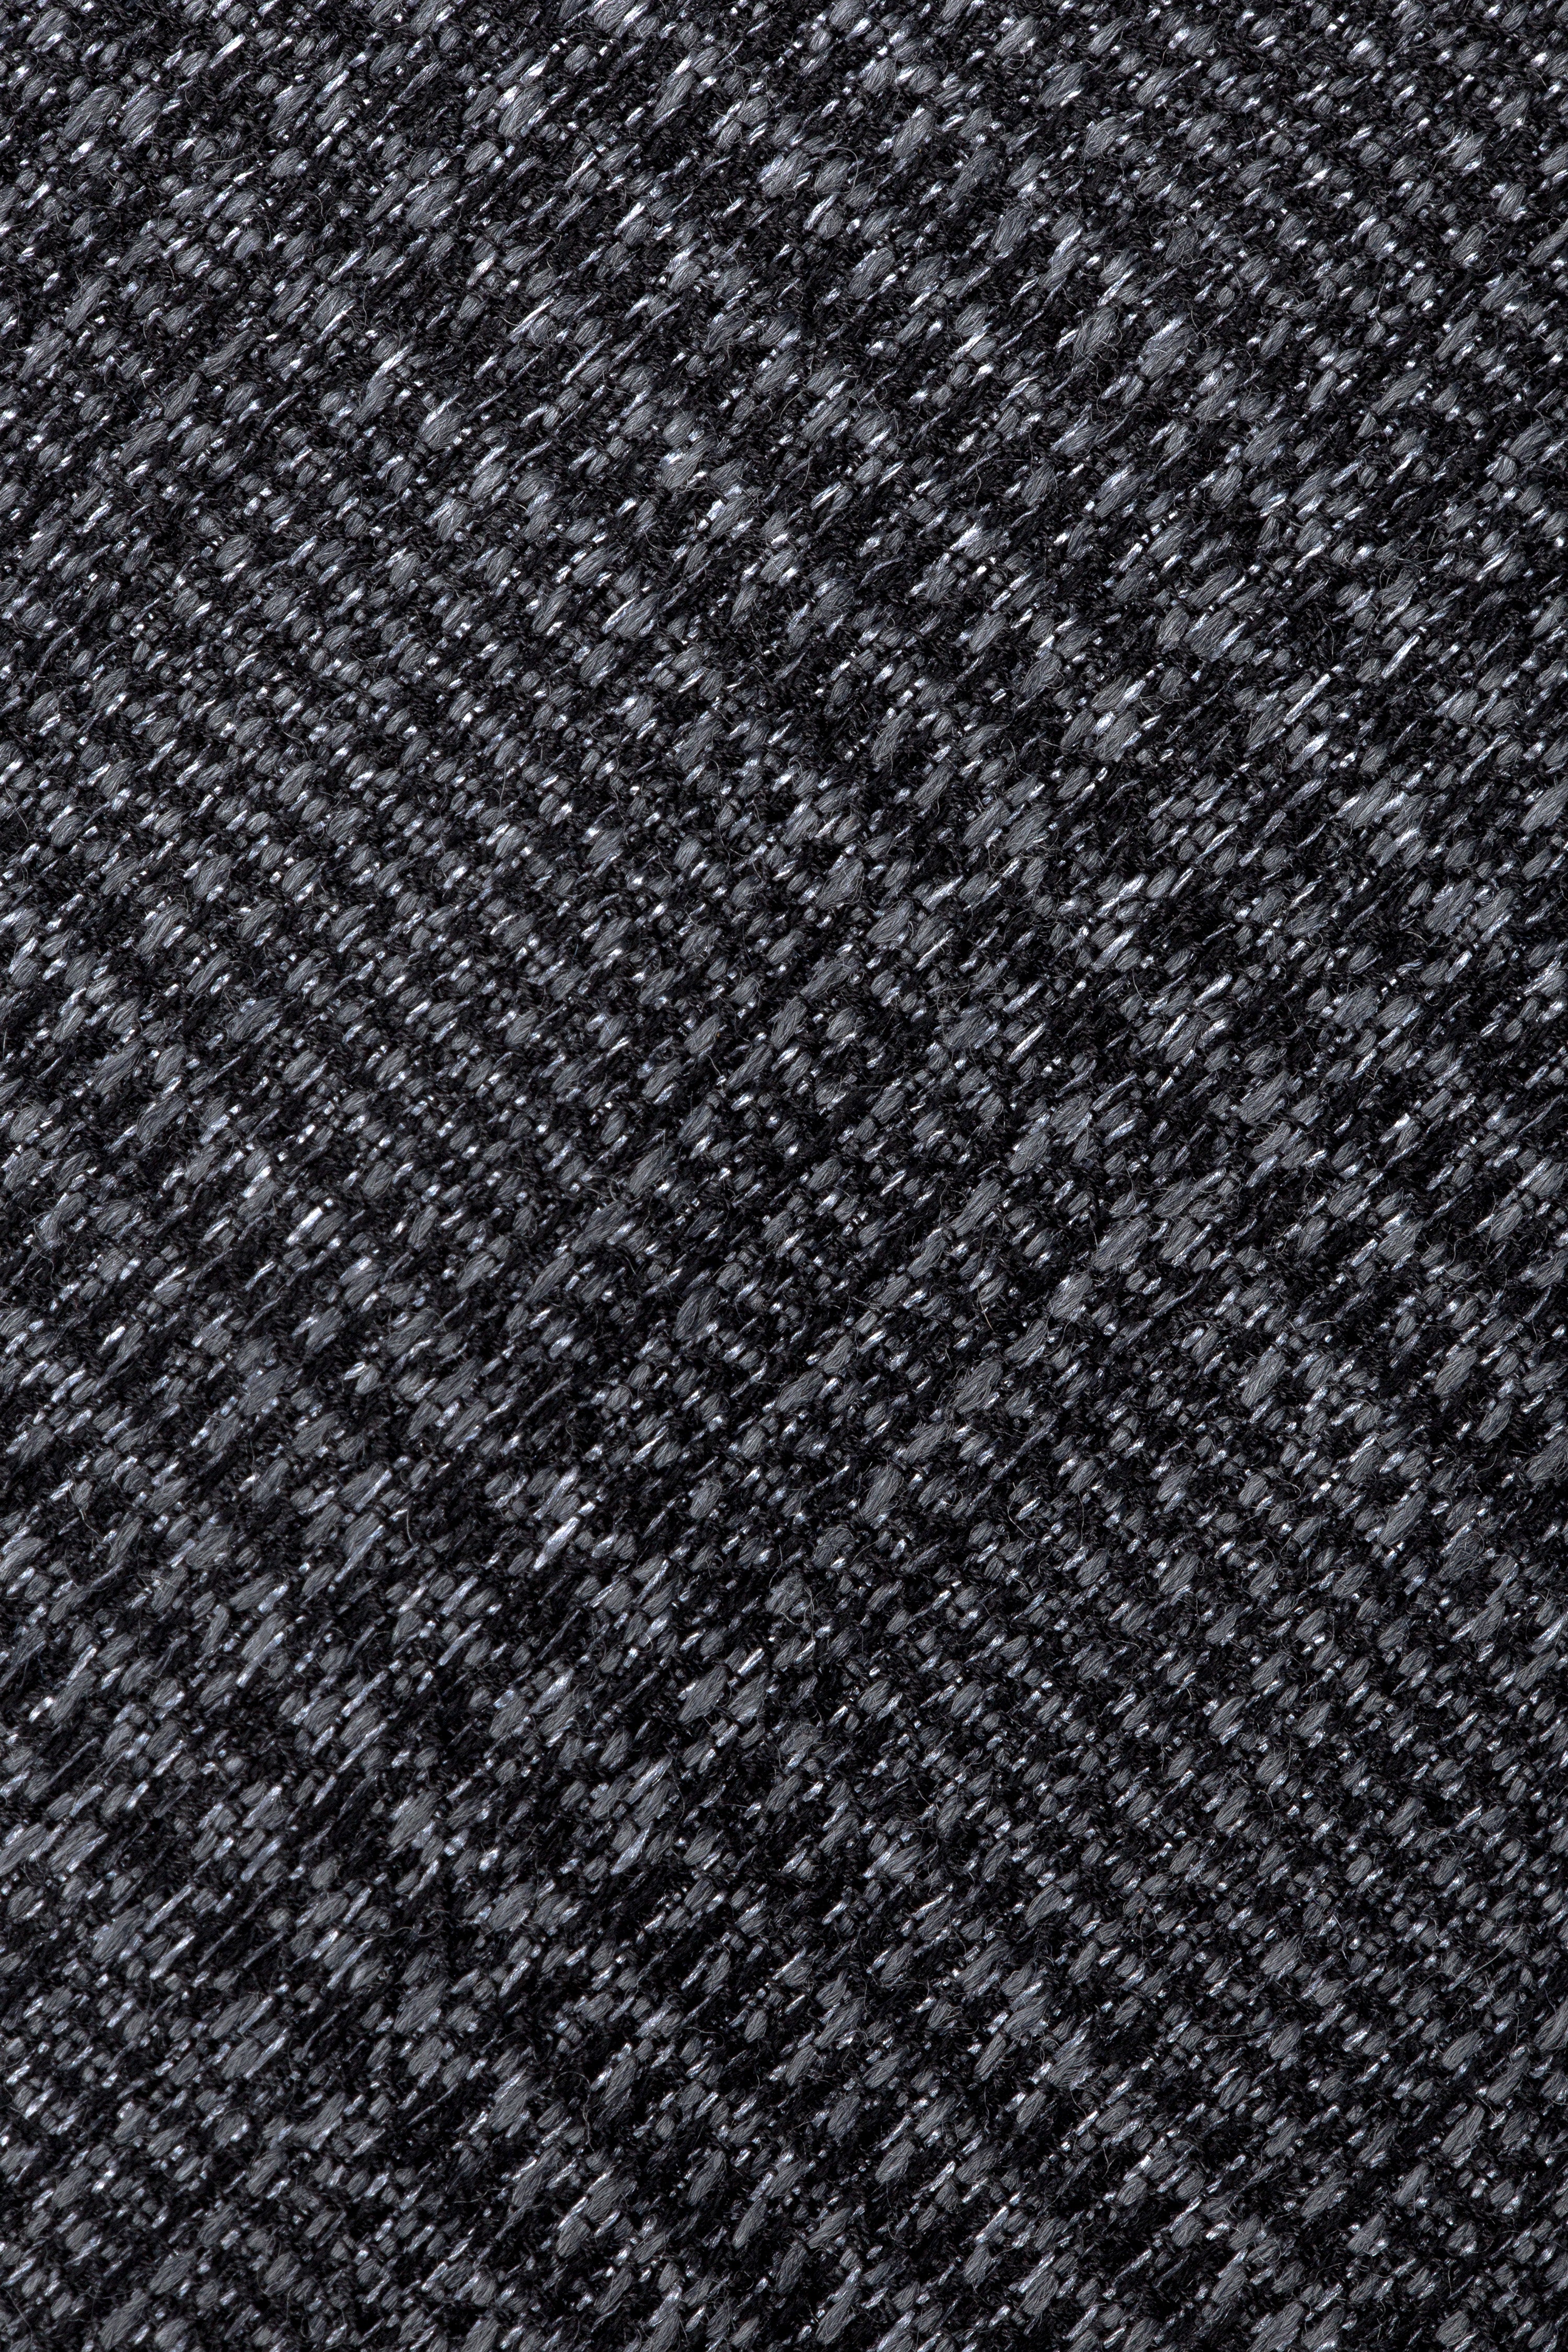 Alt view 2 Glen Plaid Woven Tie in Charcoal